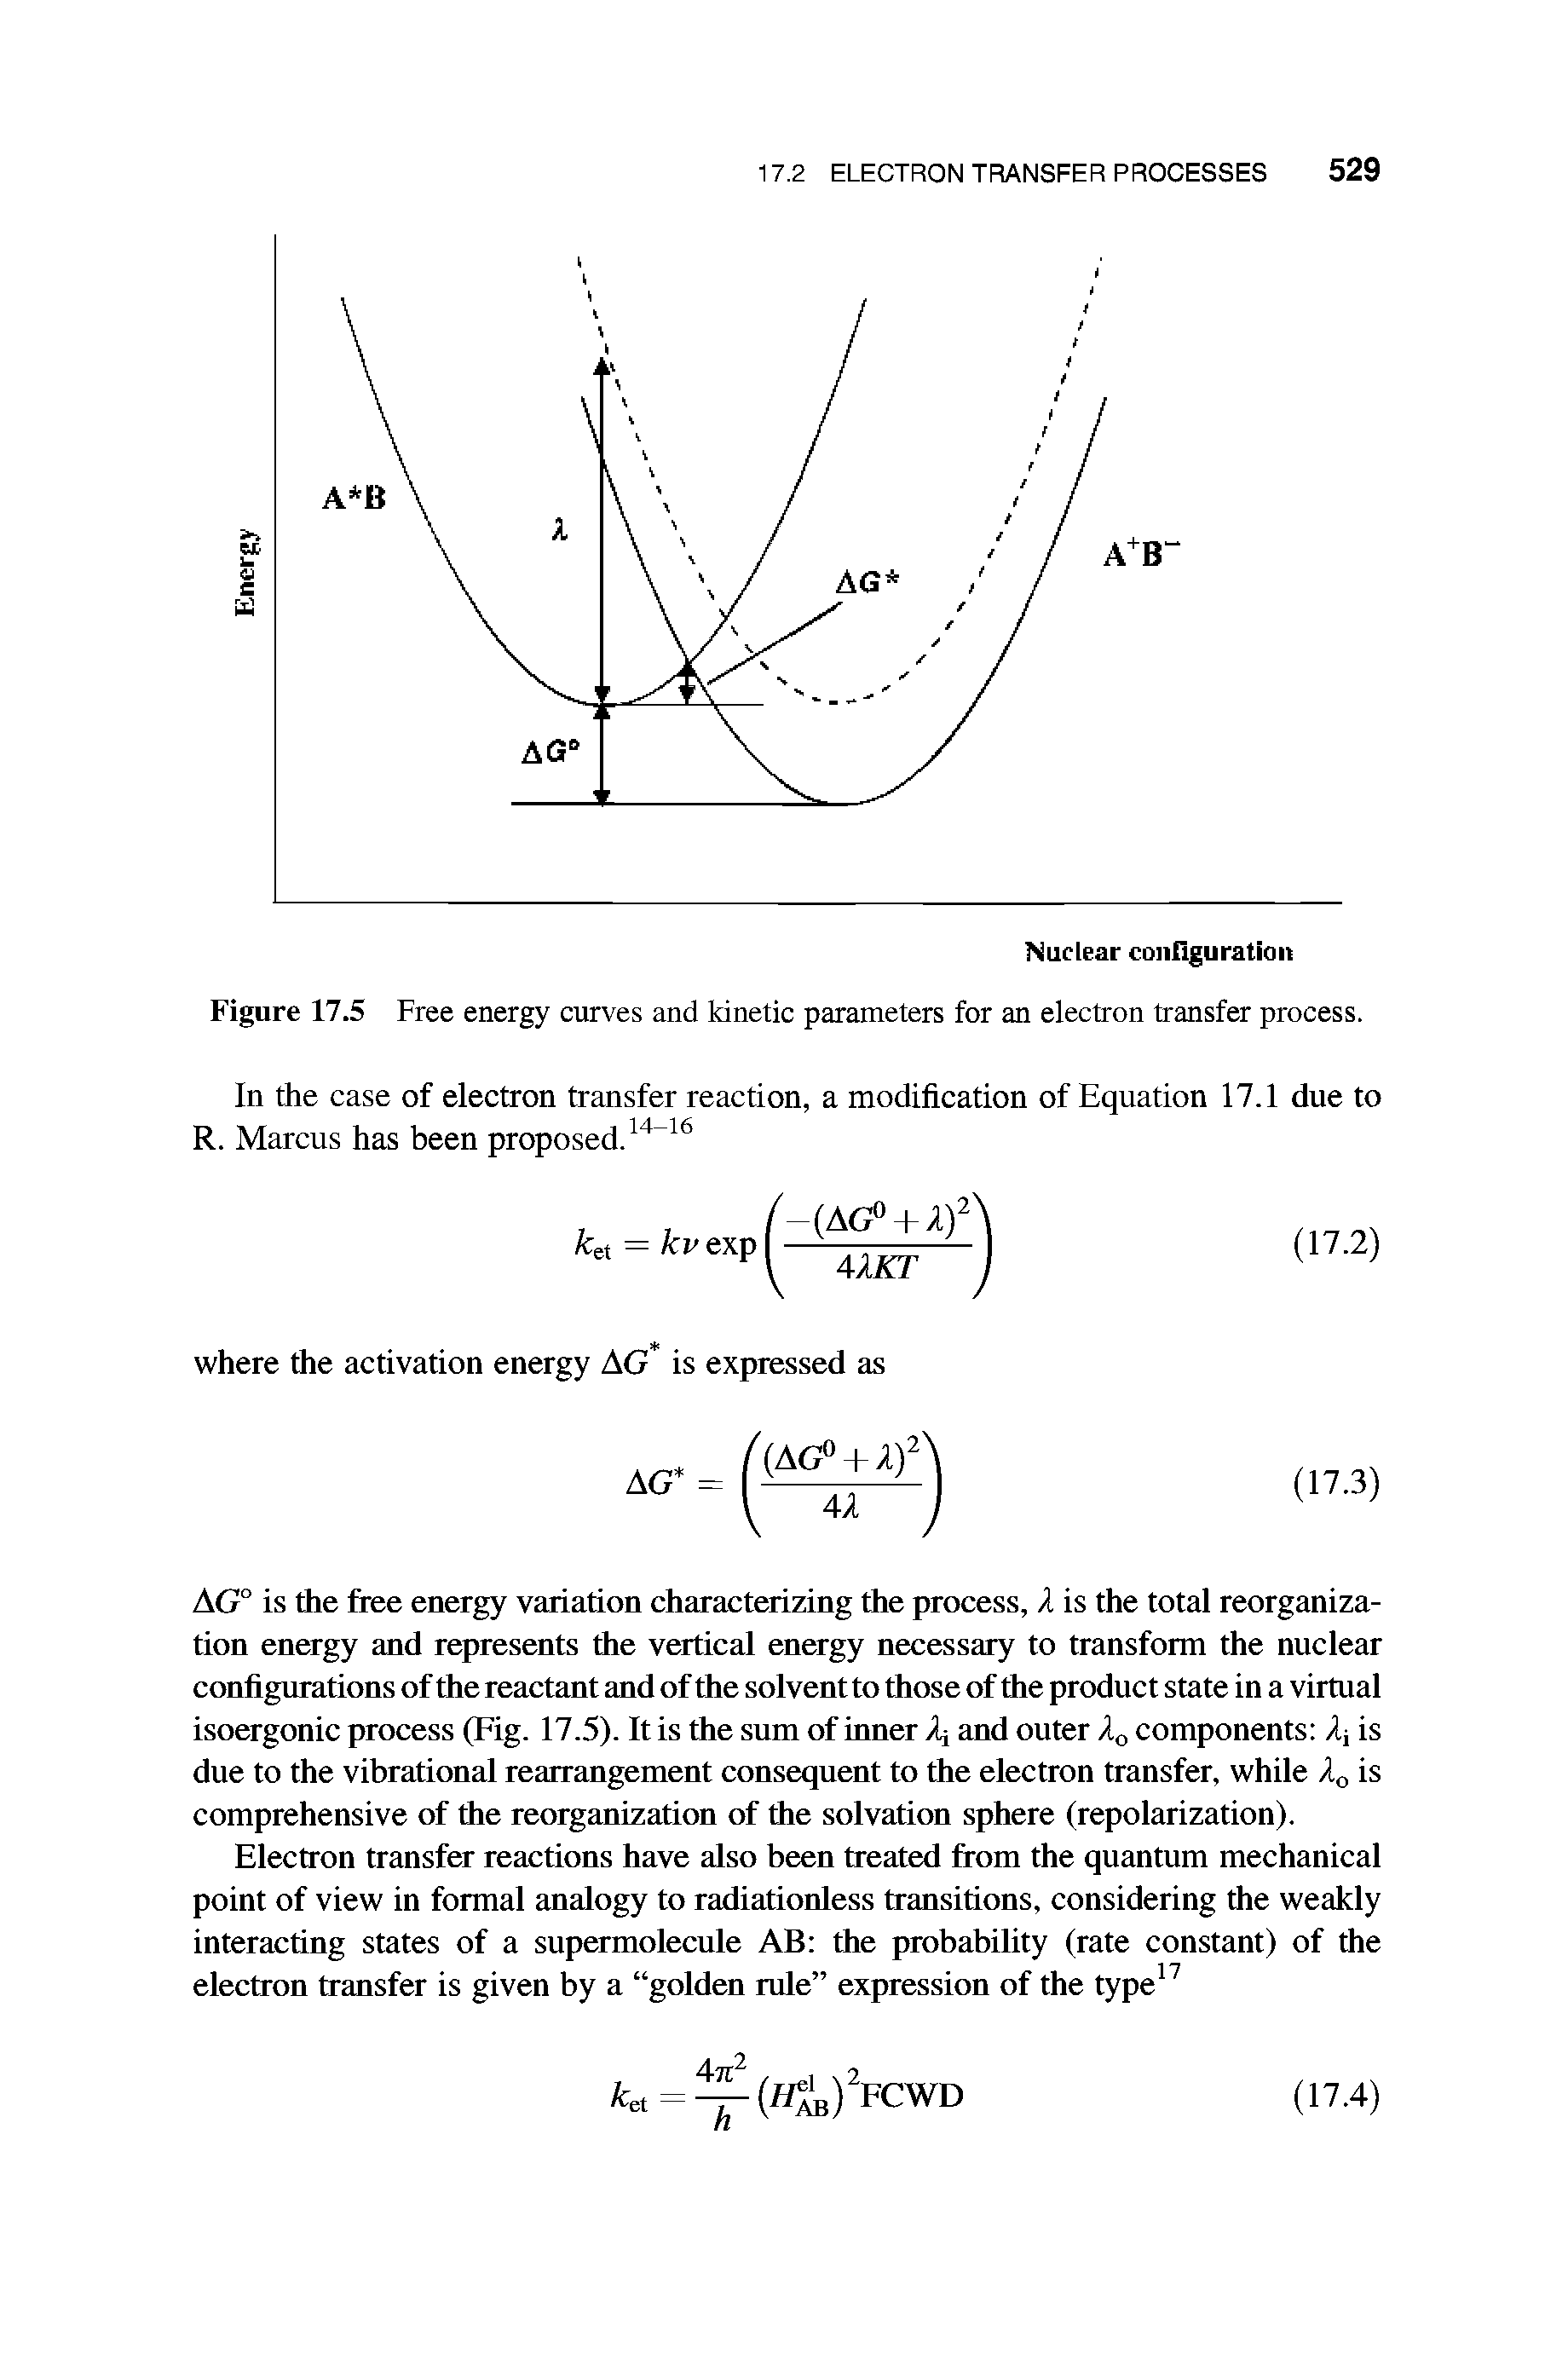 Figure 17.5 Free energy curves and kinetic parameters for an electron transfer process.